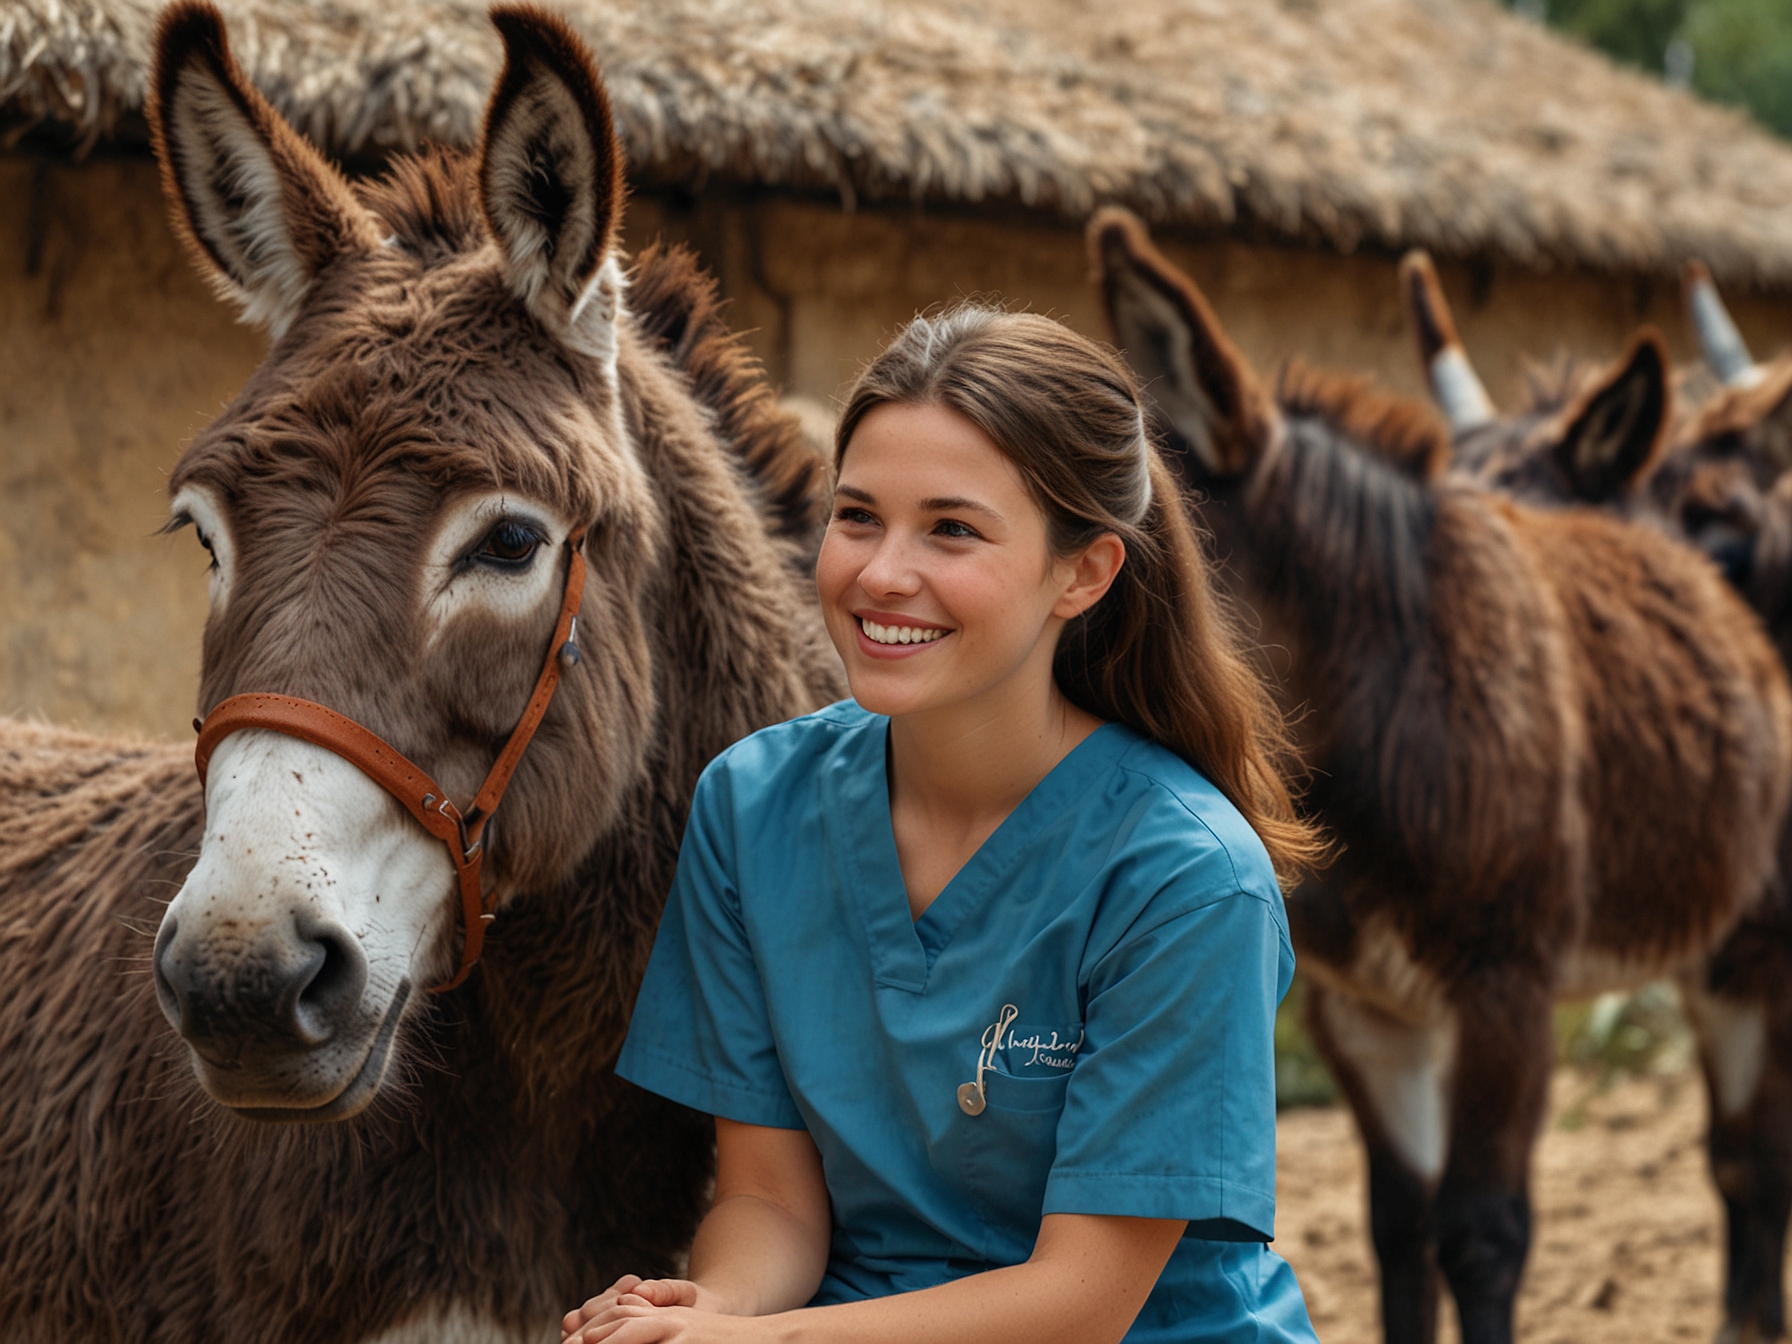 A heartwarming image of the real-life donkey that inspired Donkey from 'Shrek,' now 30 years old, receiving medical care at the sanctuary with staff providing treatments.